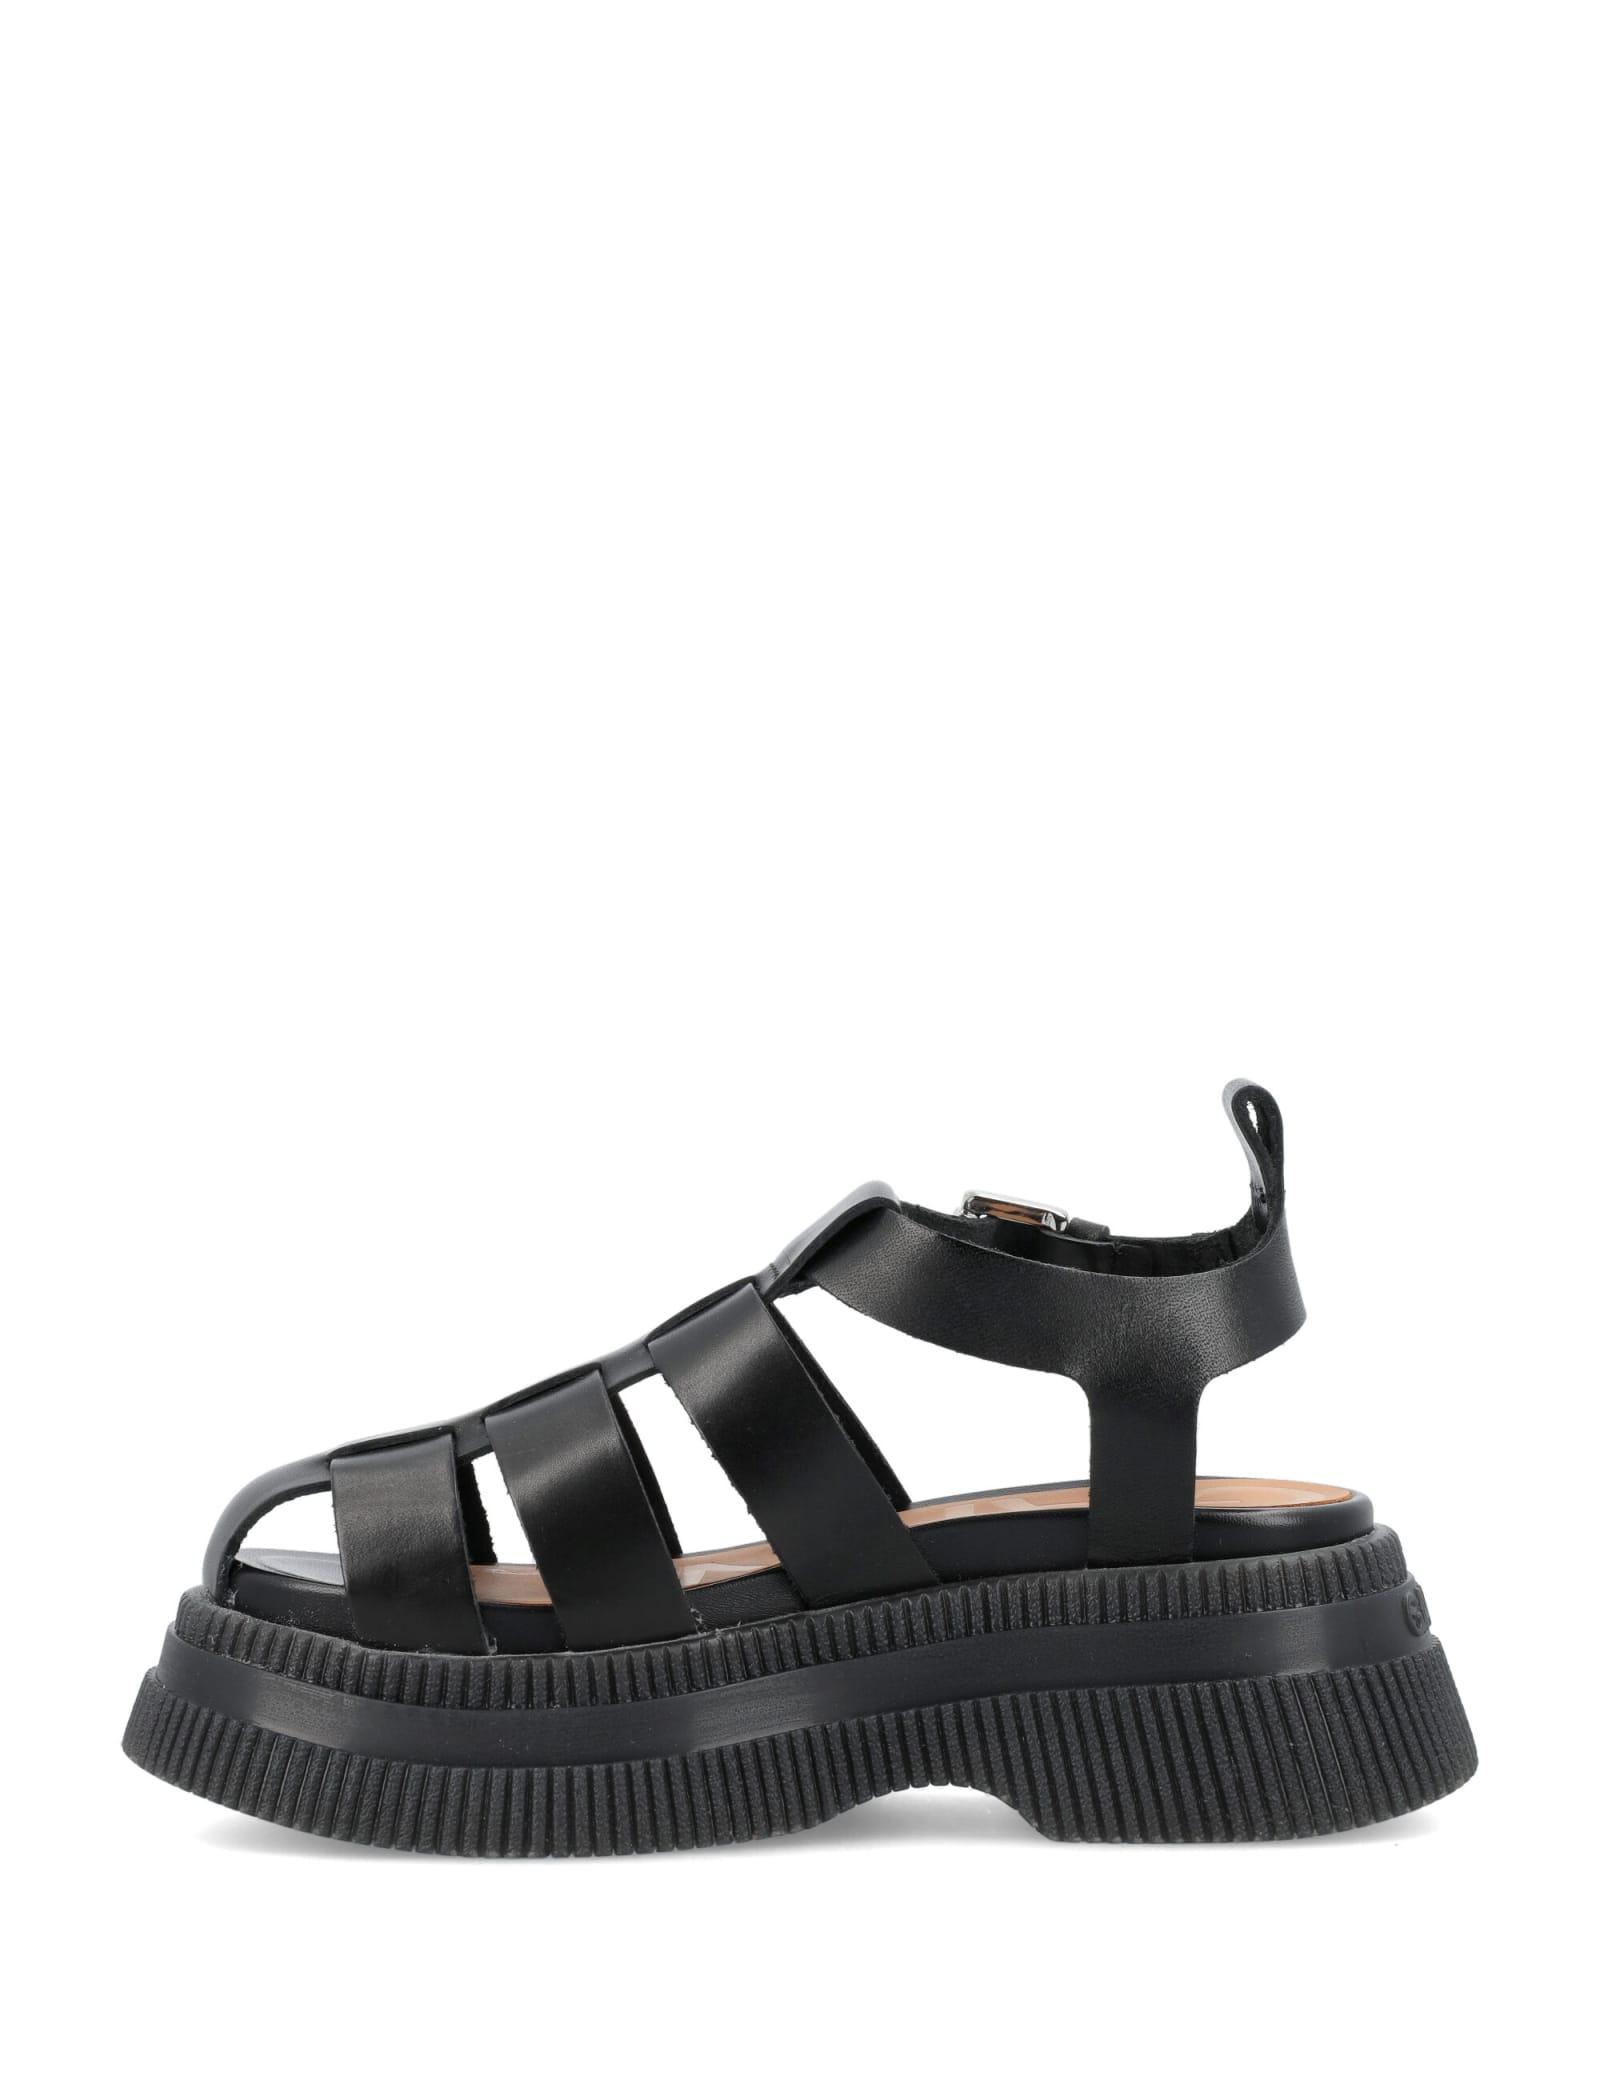 Ganni Creepers Sandals in Black | Lyst